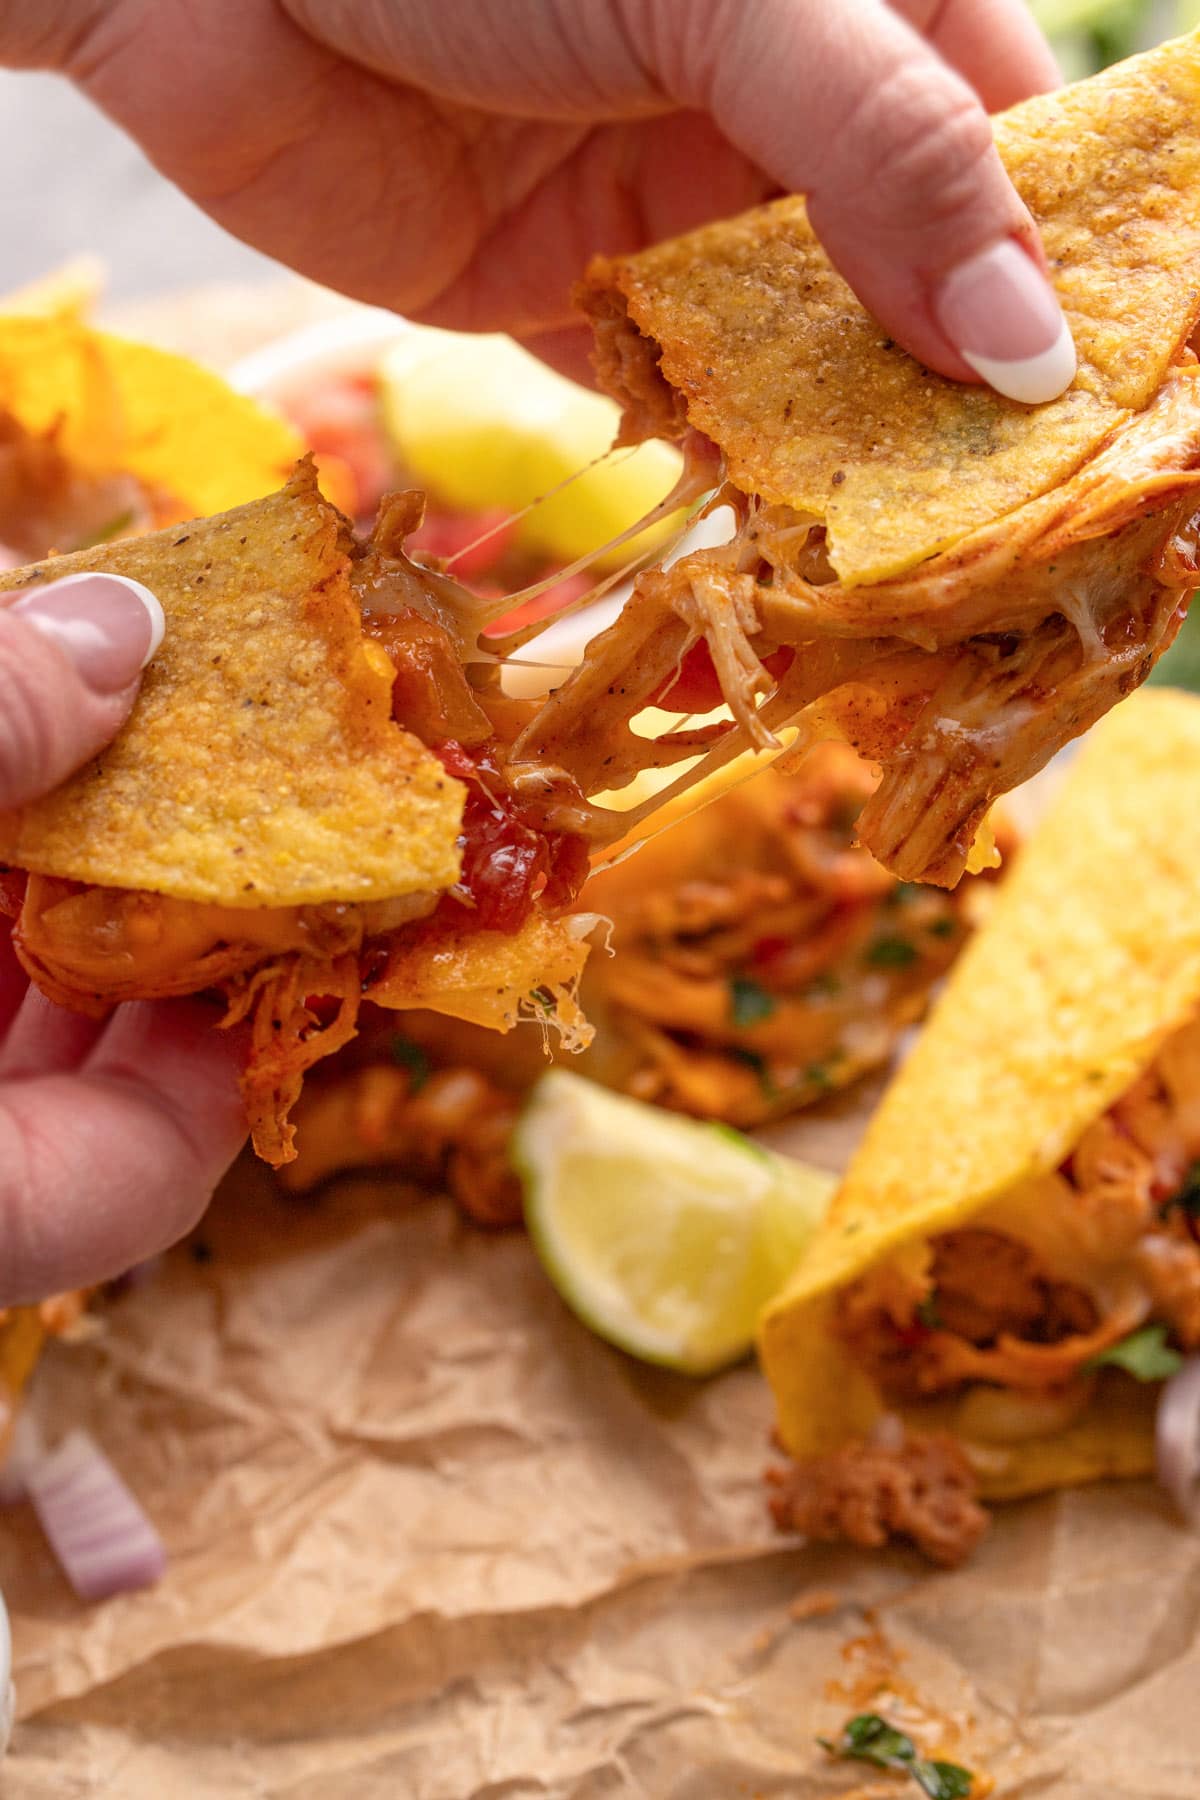 A baked chicken taco being pulled apart with cheese strings.